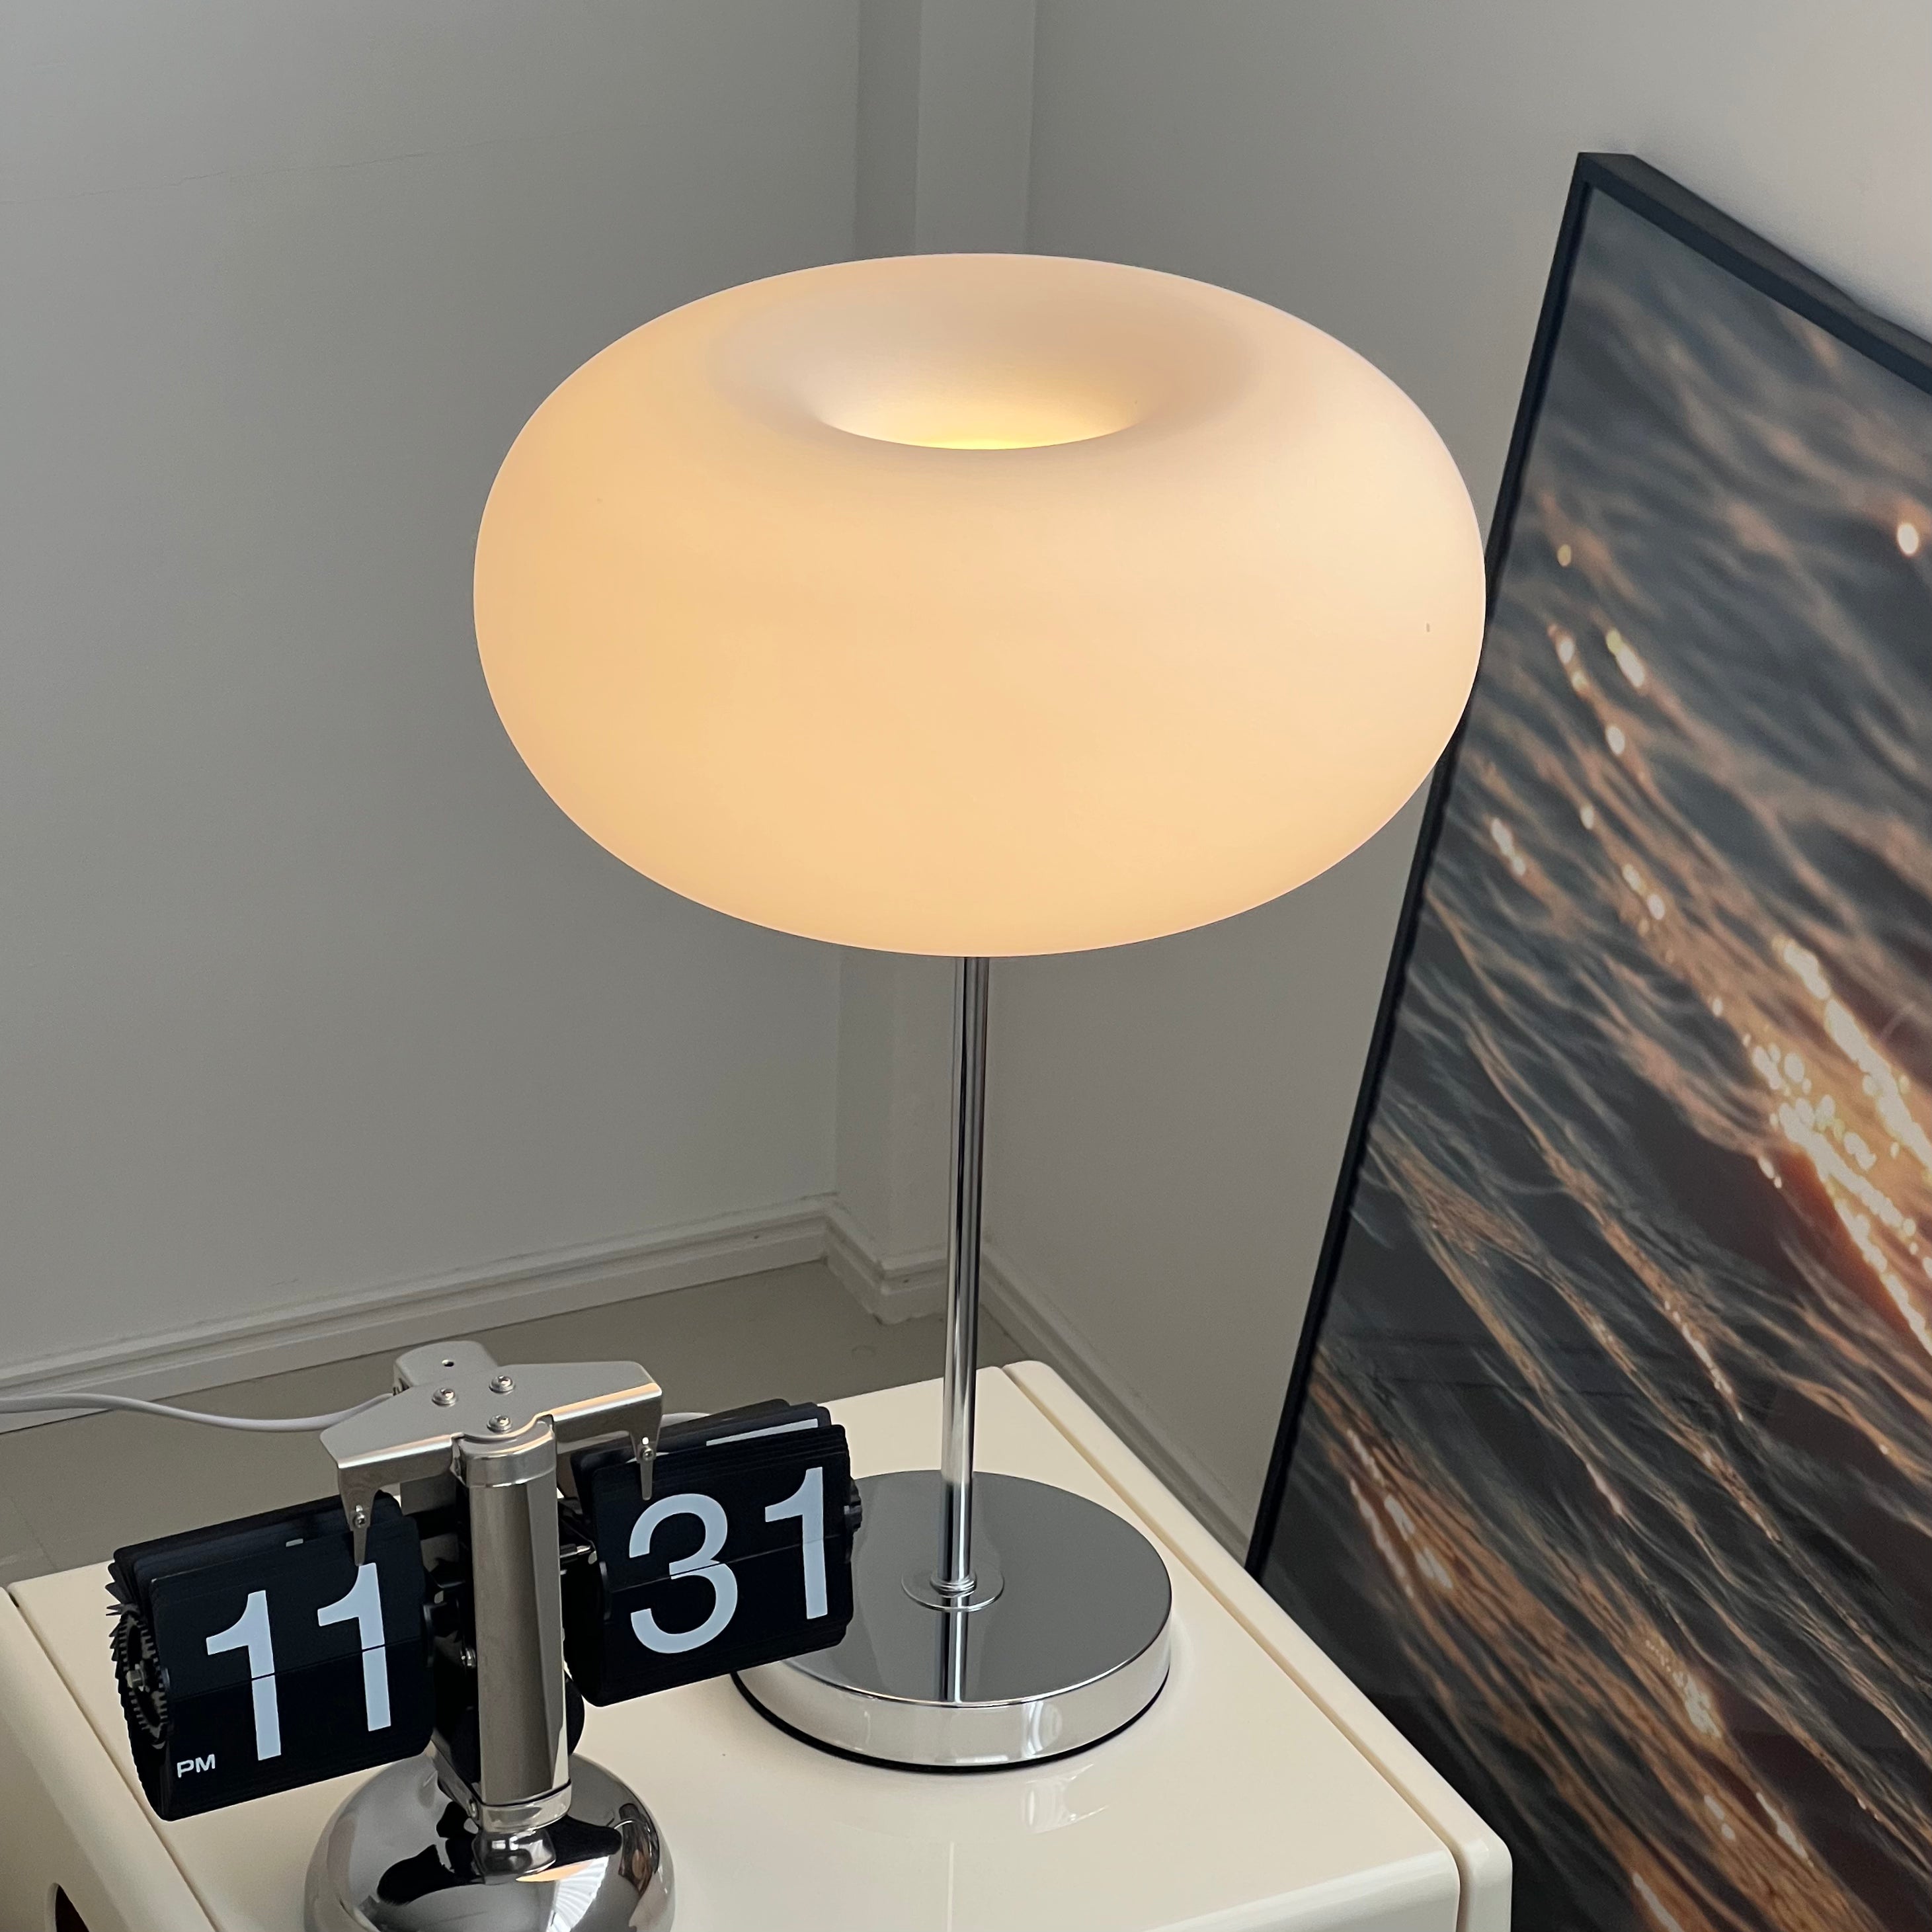 Egg stand lamp